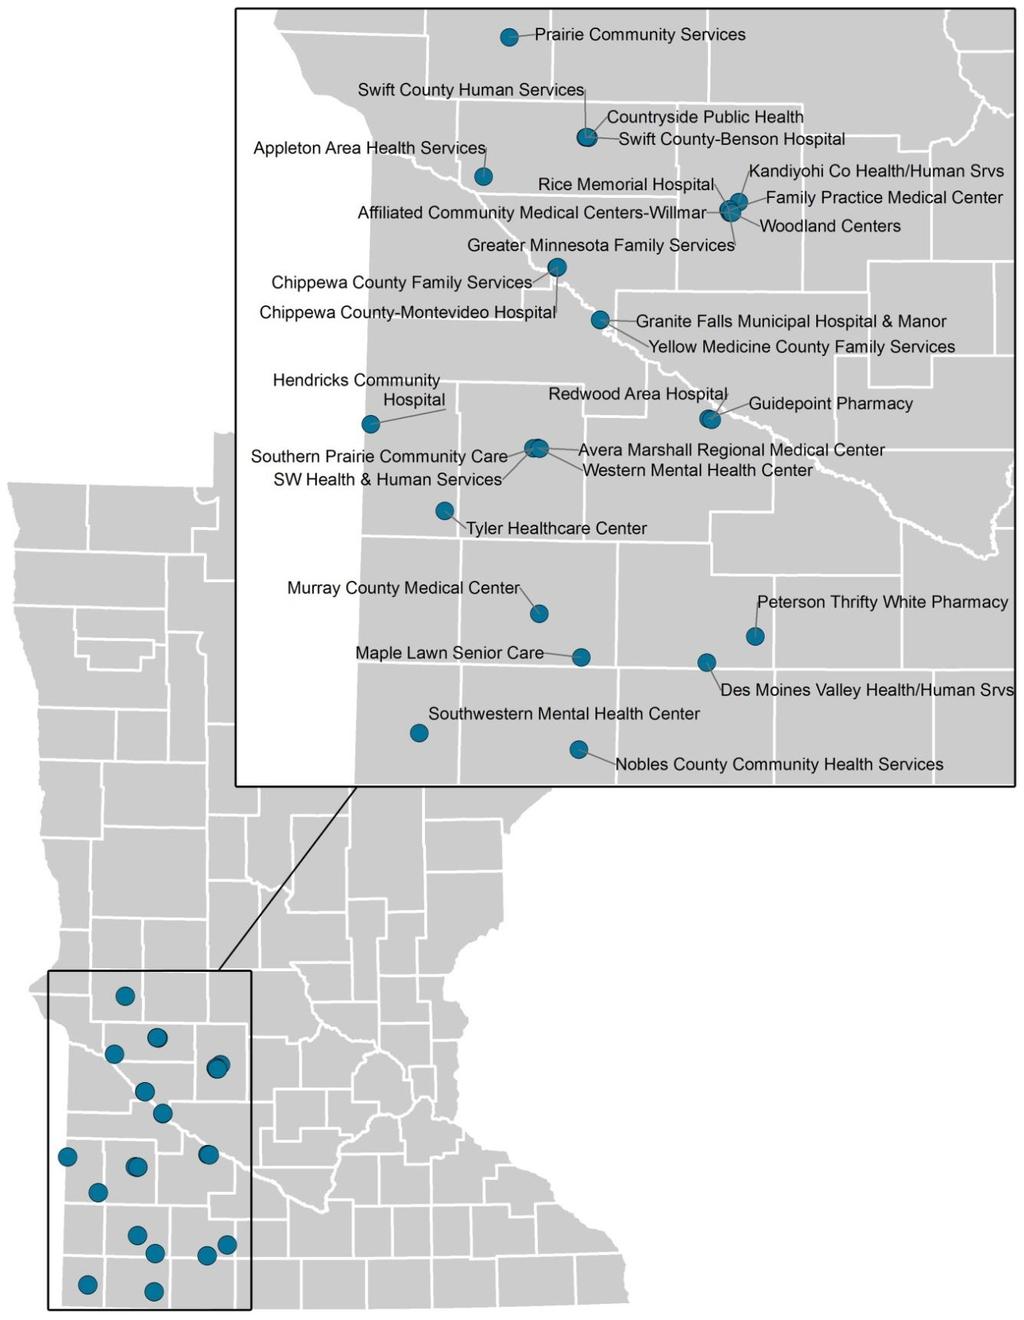 11. Southern Prairie Community Care Note: Plotted organizations may overlap because they are in close proximity.